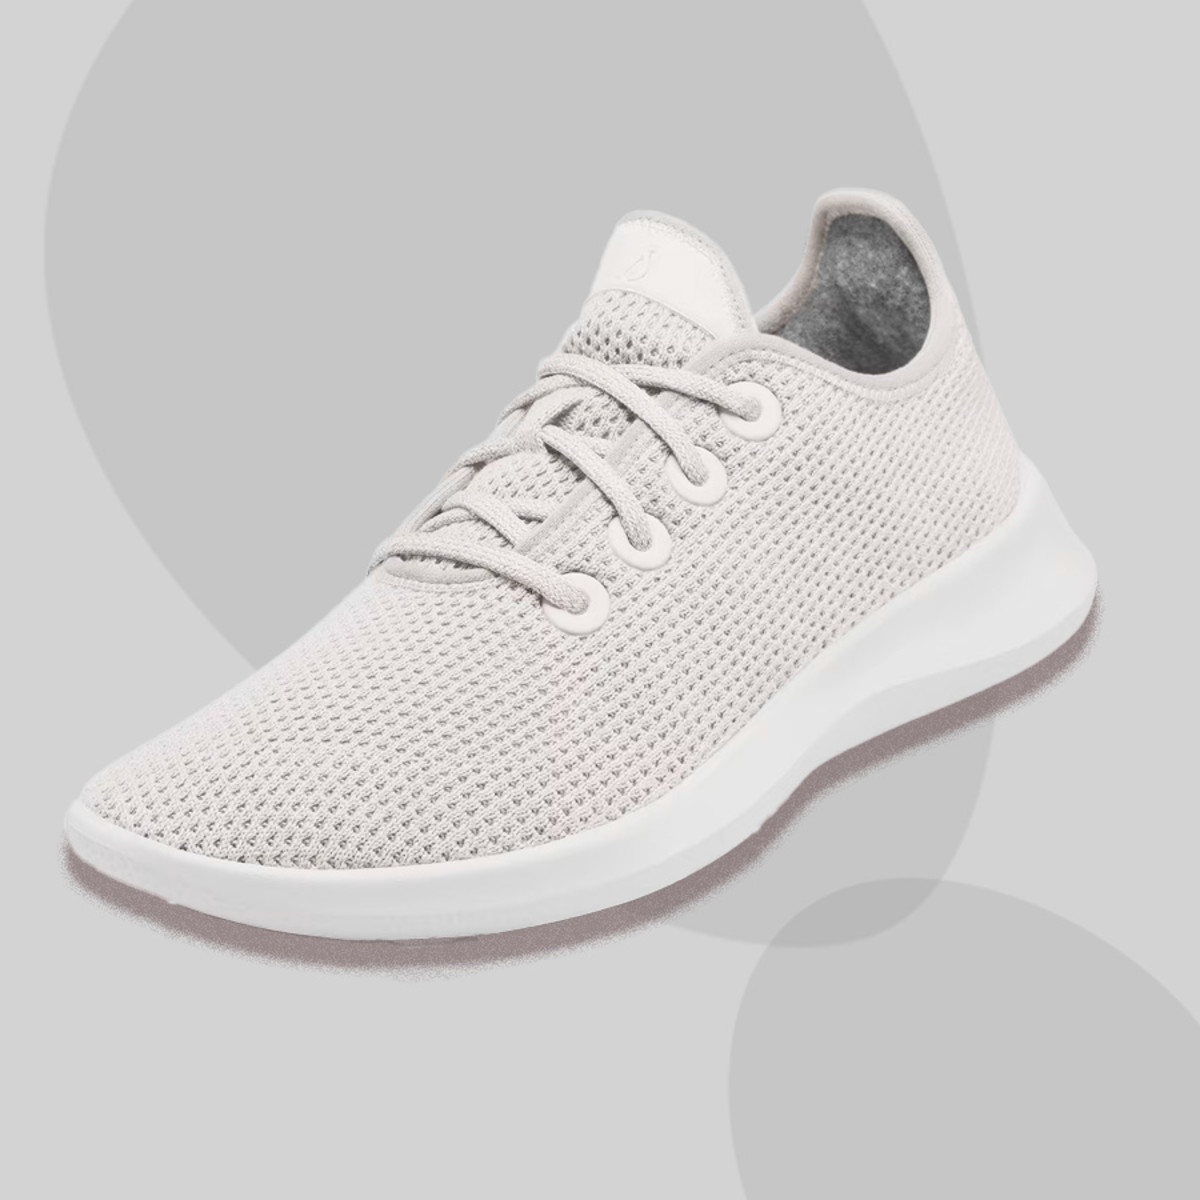 White Colour Shoes For Best Boys Shoes | gintaa.com